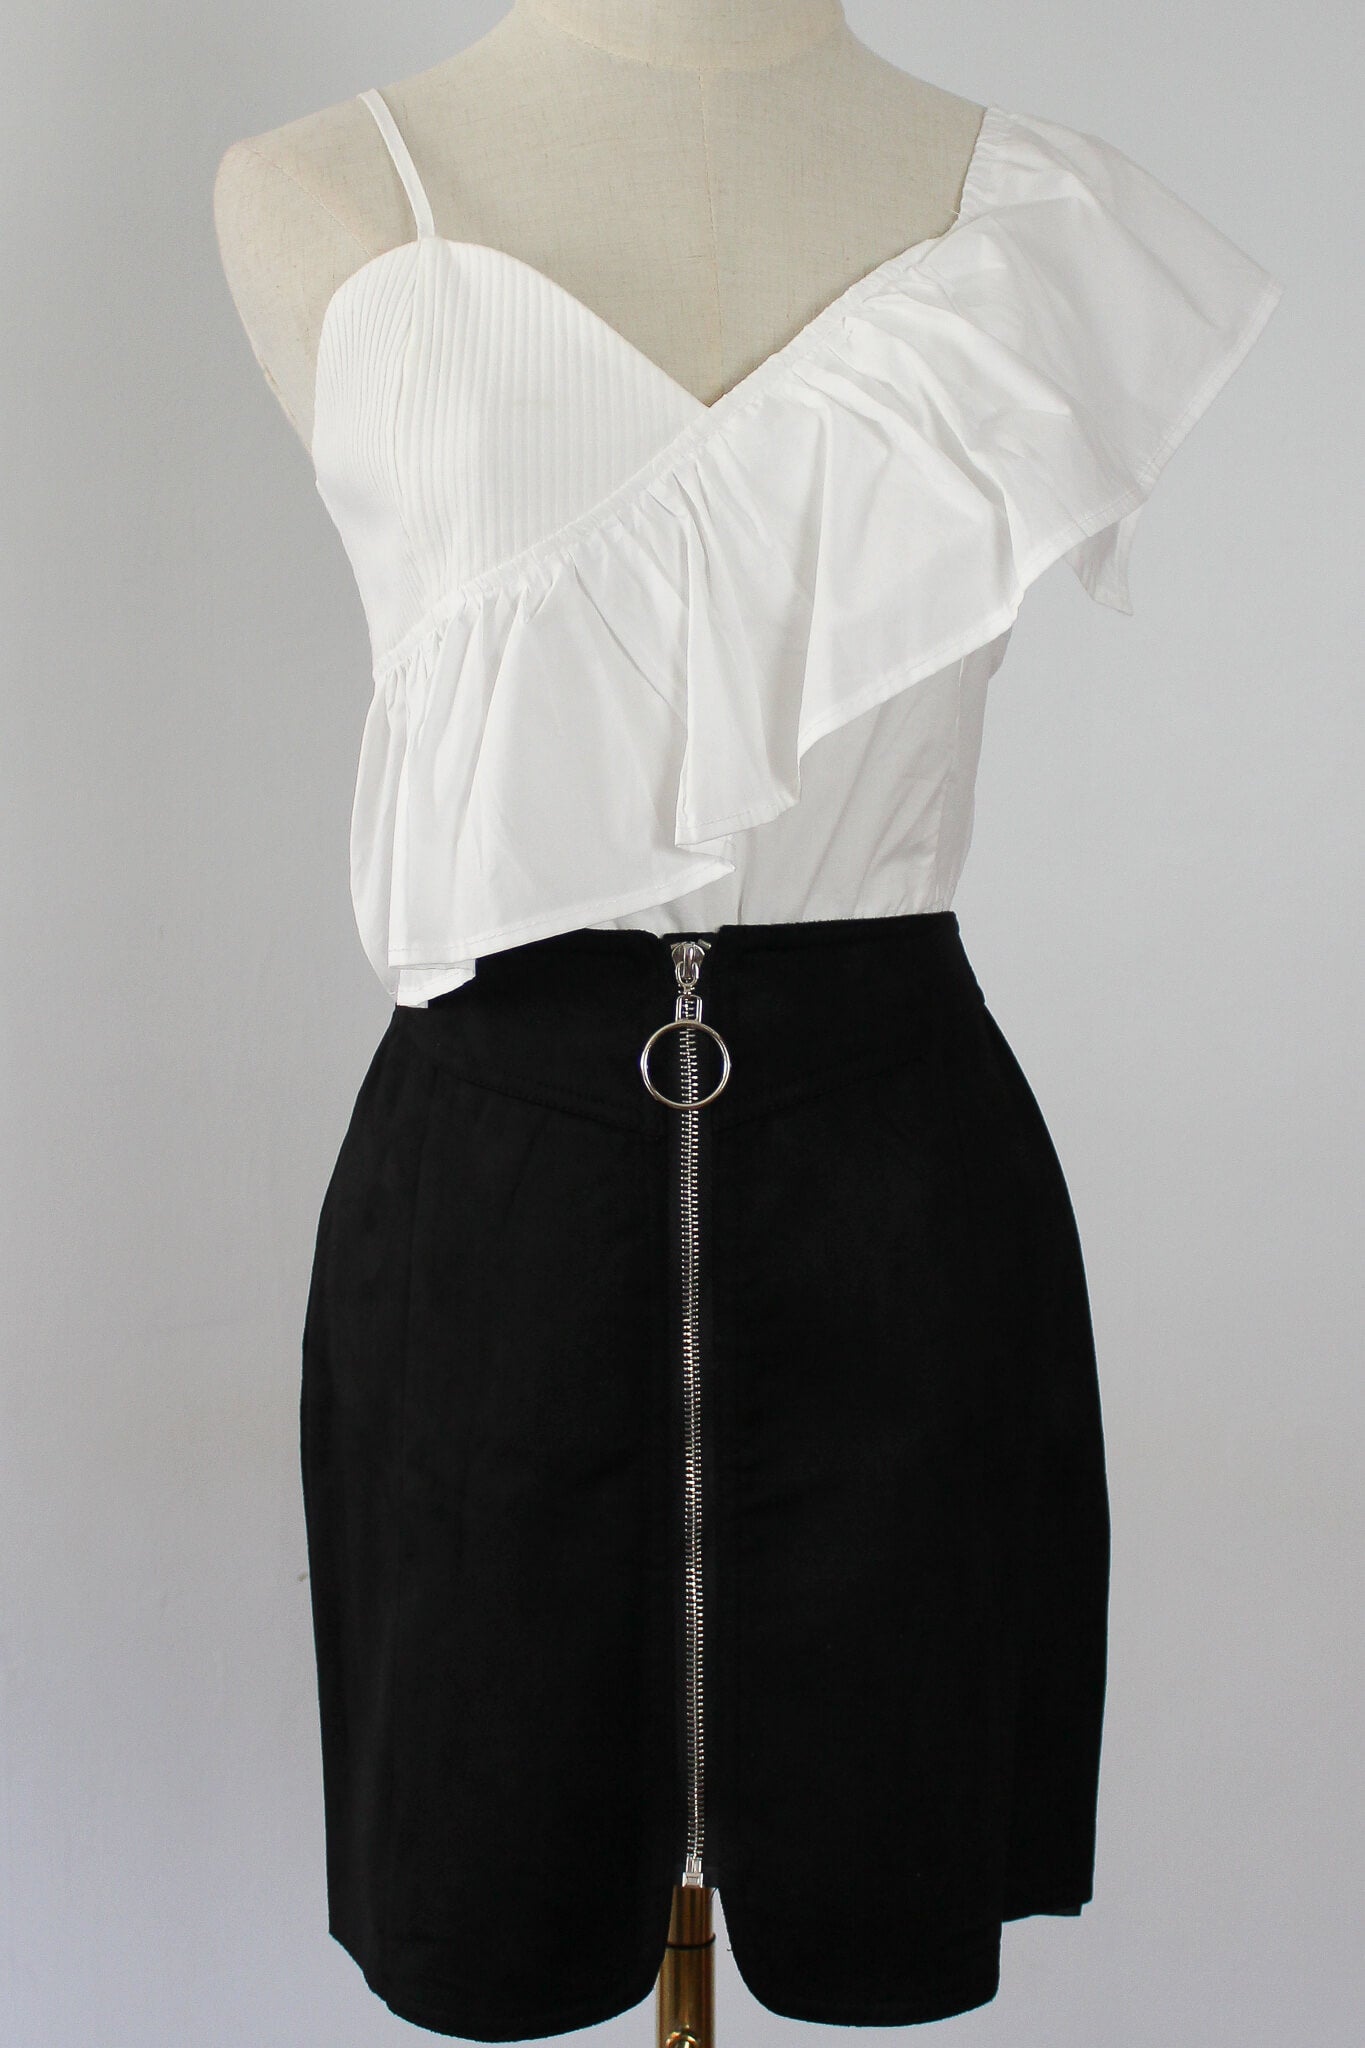 Front zipper skirt with suede like material. High waist fit